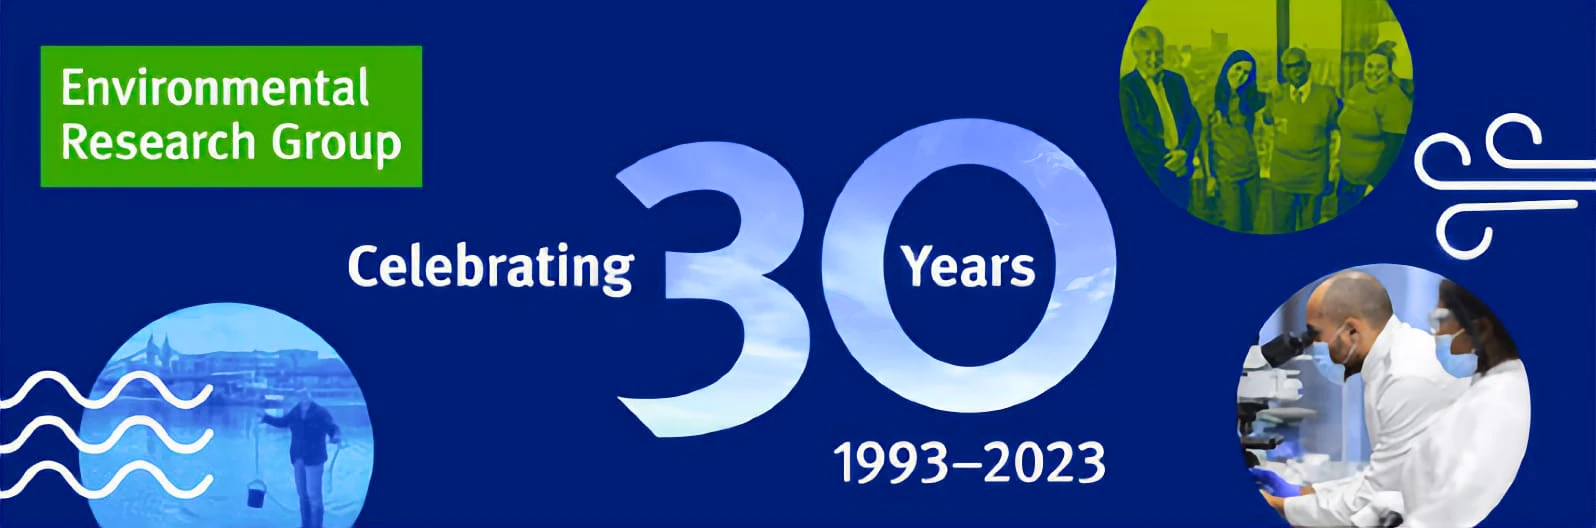 Environmental research Group - Celebrating 30 Years